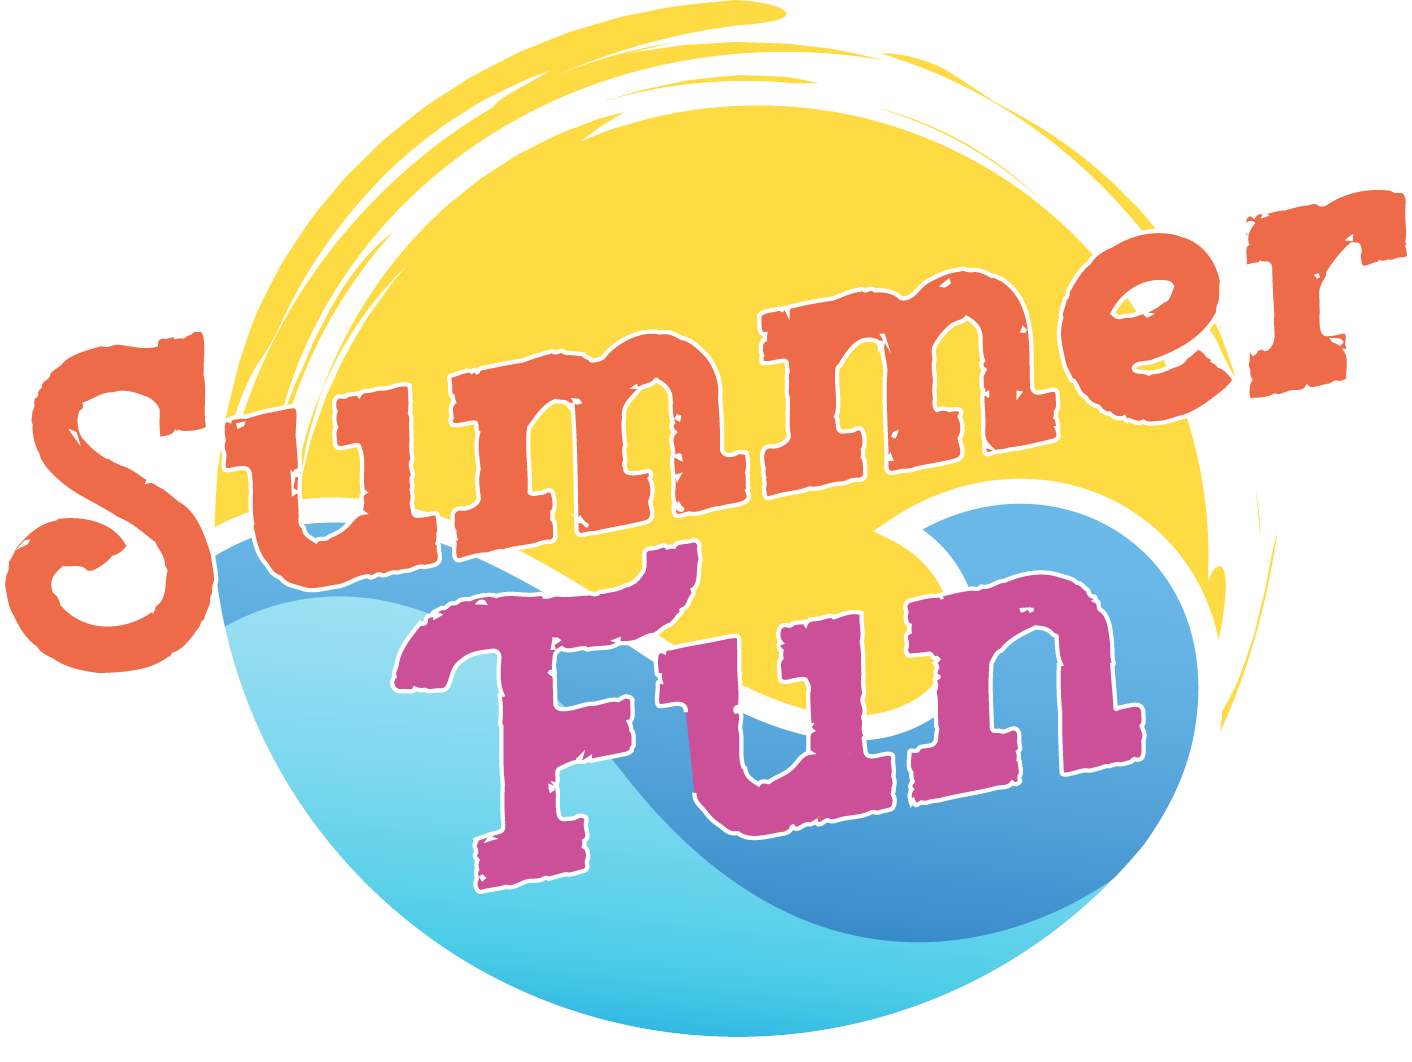 Summer Fun logo featuring a blue swirling wave beneath a yellow sky and text in orange and pink